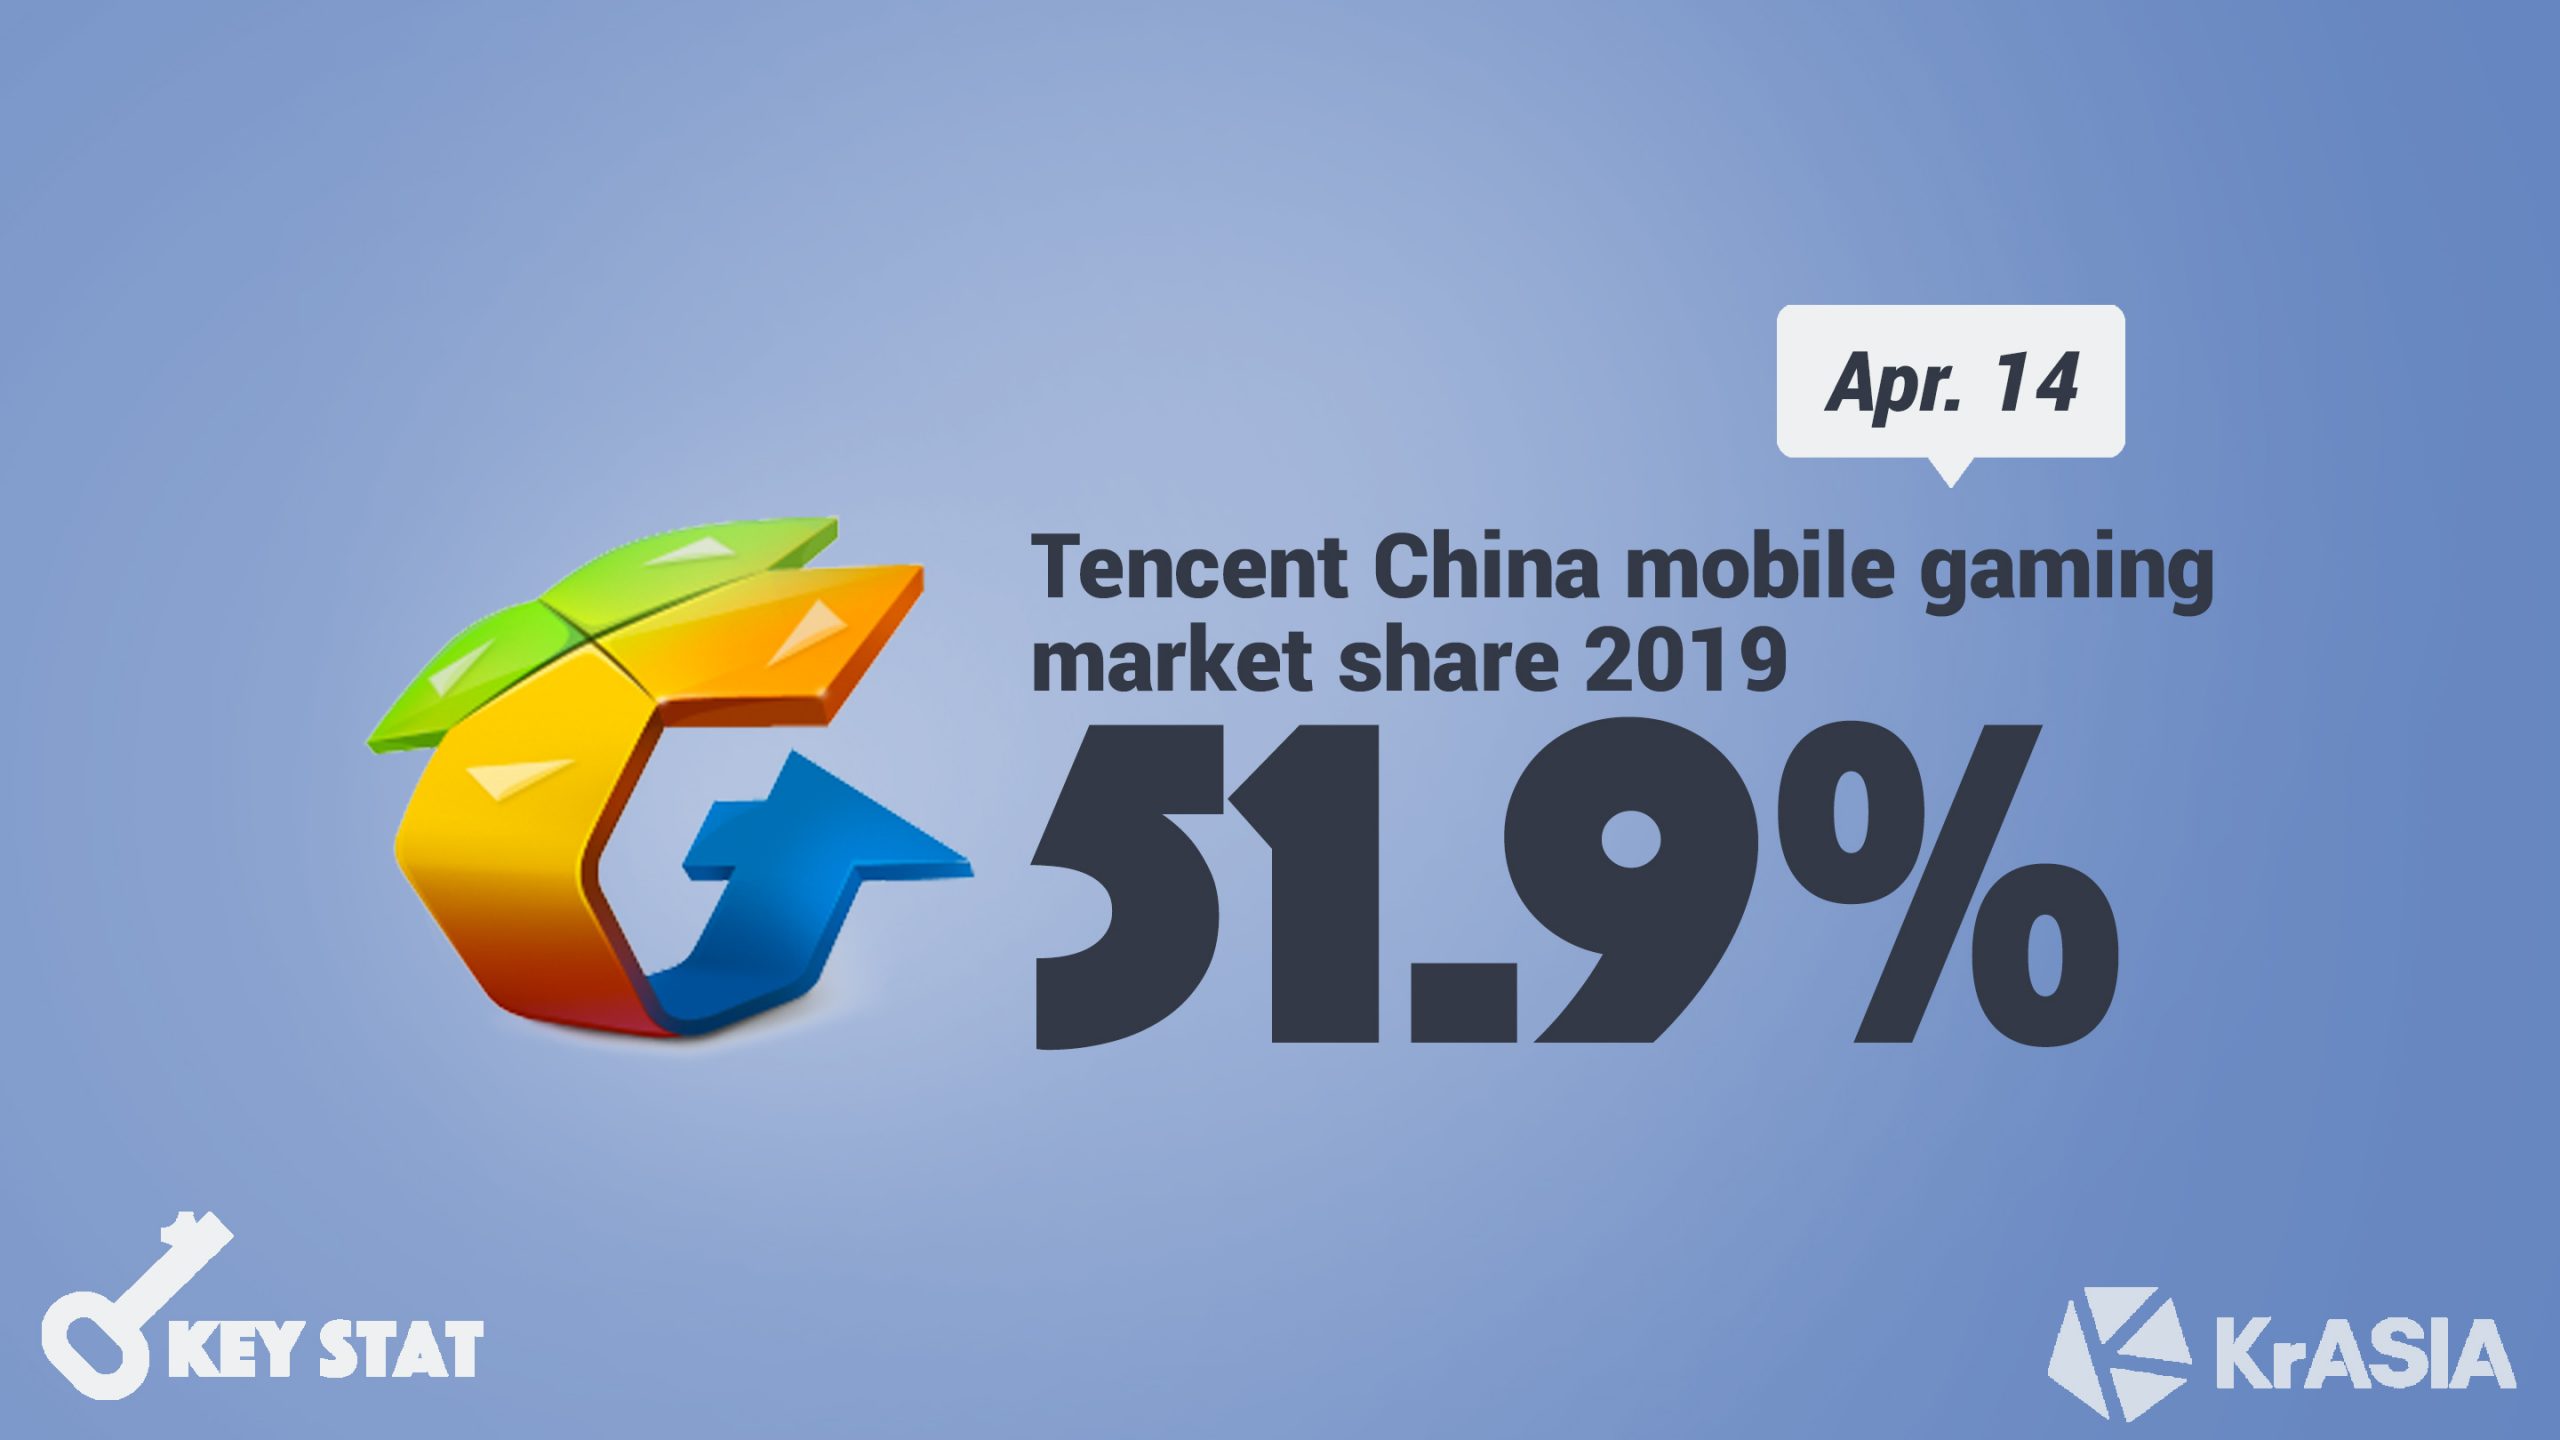 KEY STAT | Mobile games to take over 70% of China’s gaming market in 2020